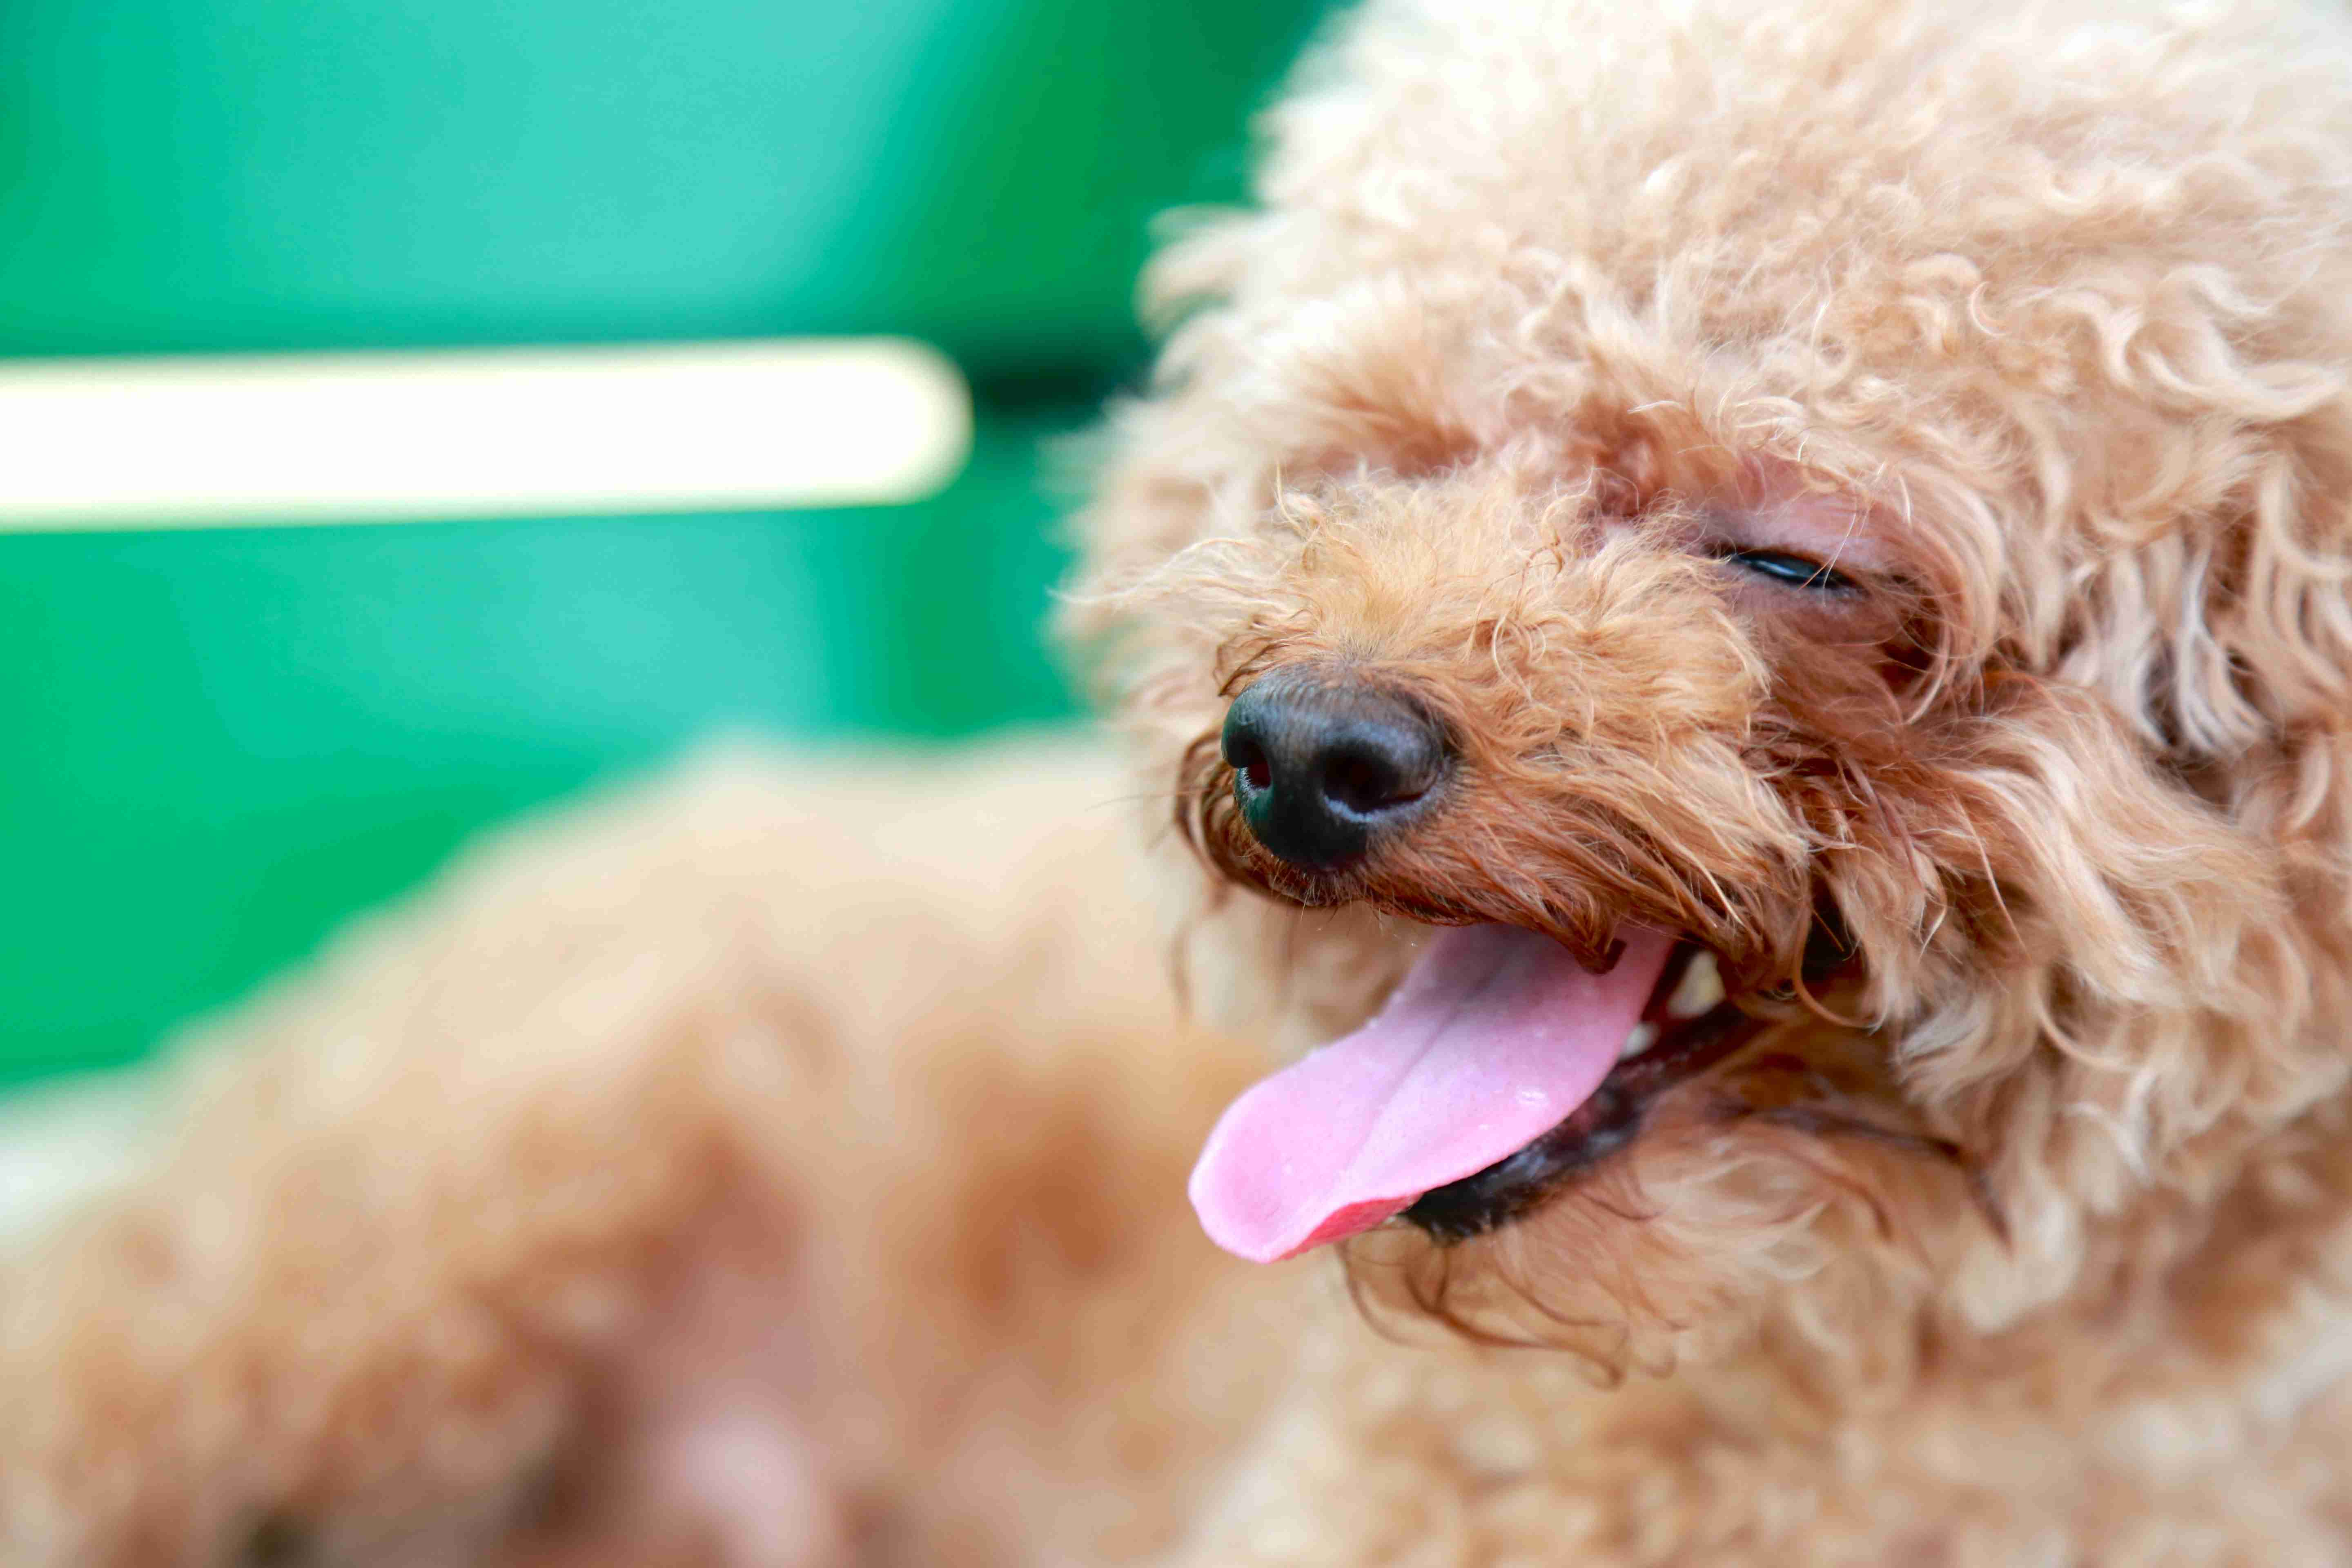 Can Poodles develop hip dysplasia or other orthopedic issues? How can these conditions be managed or treated?